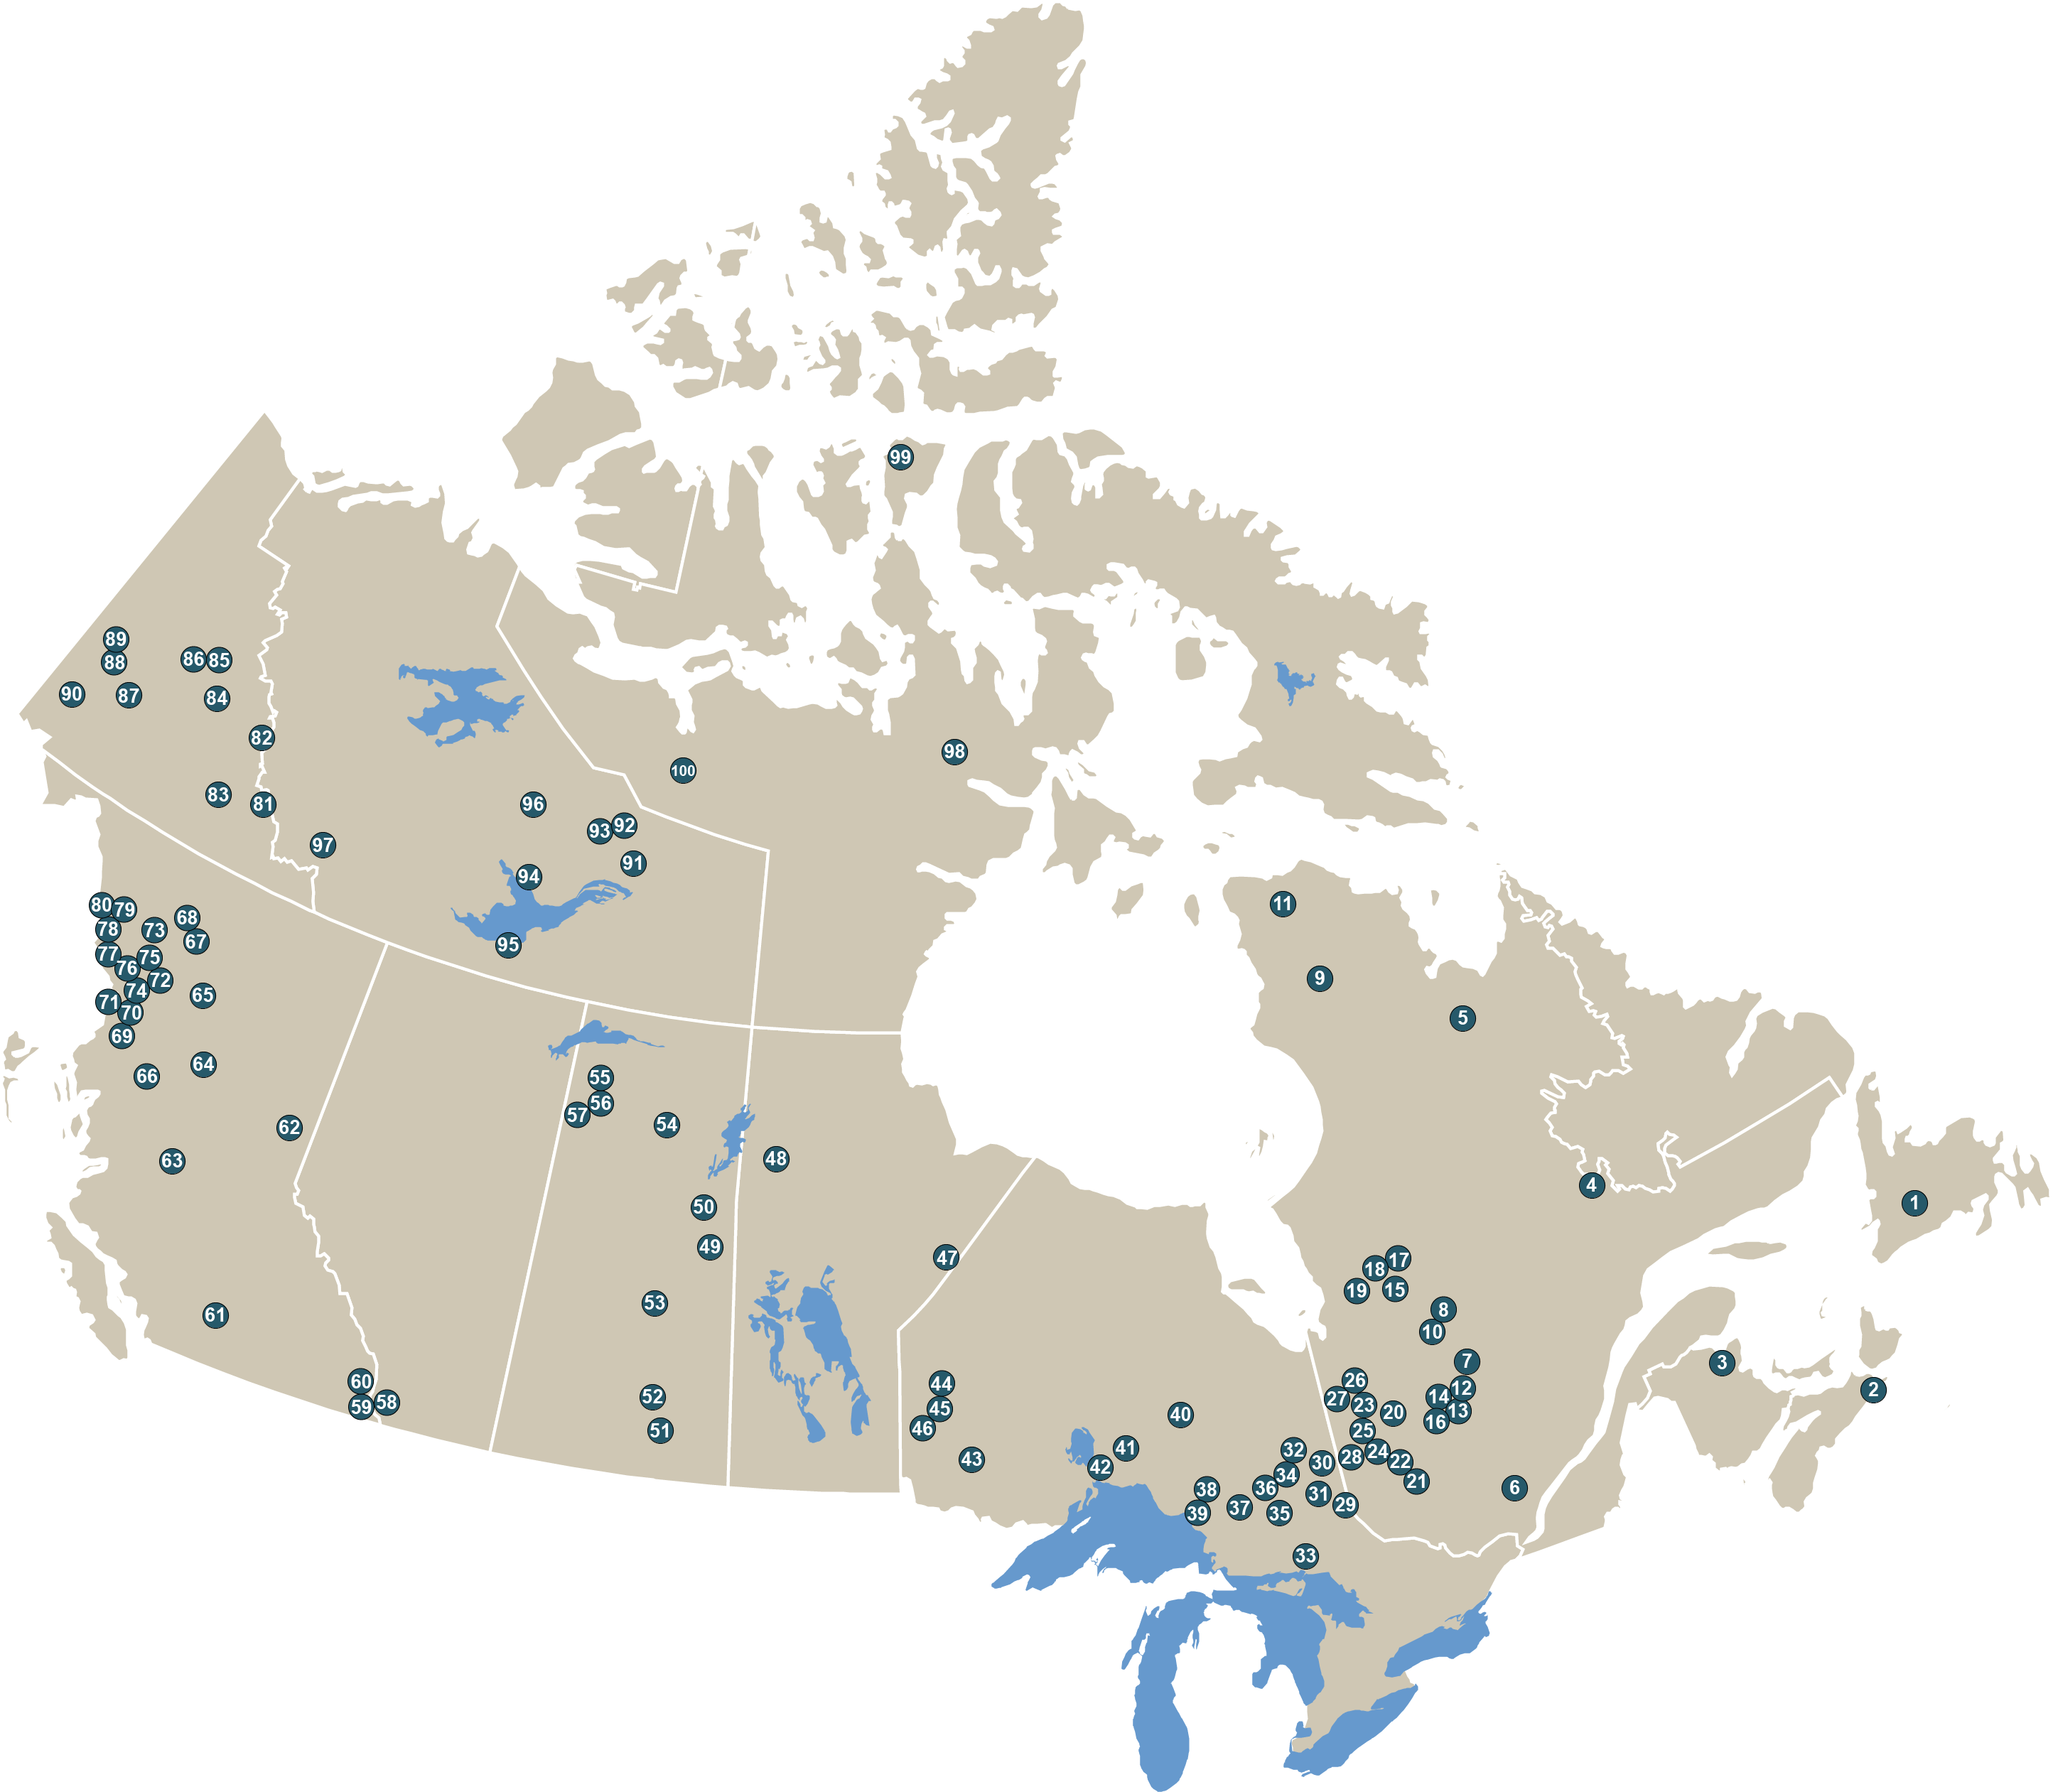 This image is a map of Canada that displays geographically, by province and territory, the locations of the top 100 off-mine-site exploration and deposit appraisal projects of 2018.